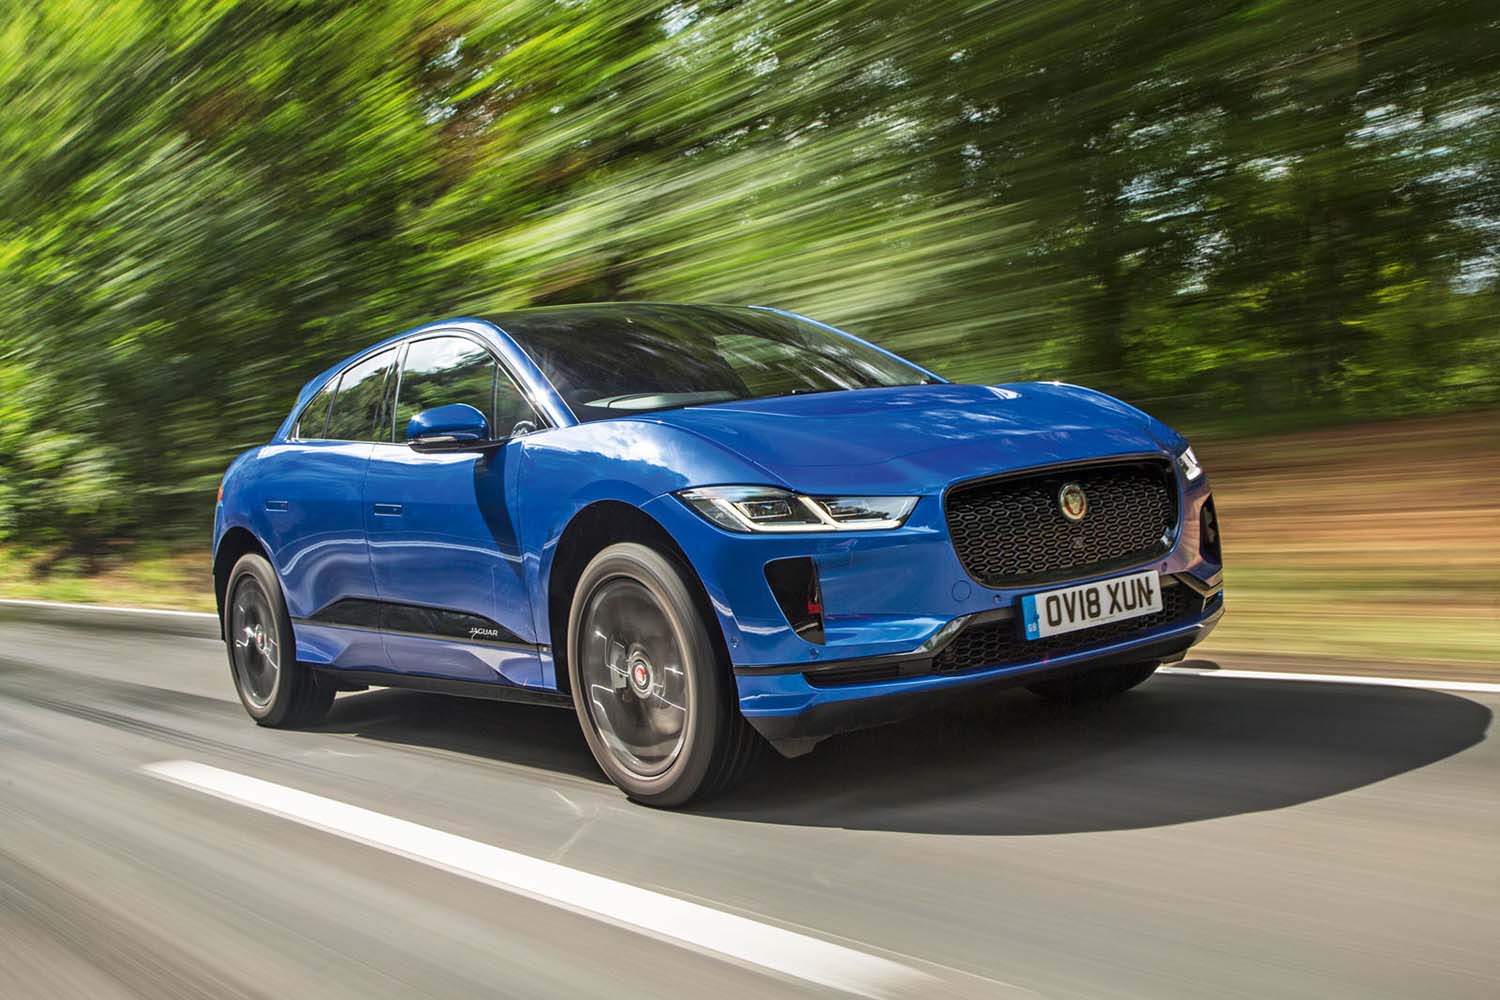 Top 10 Sustainable Luxury Cars for 2020: Jaguar I-PACE